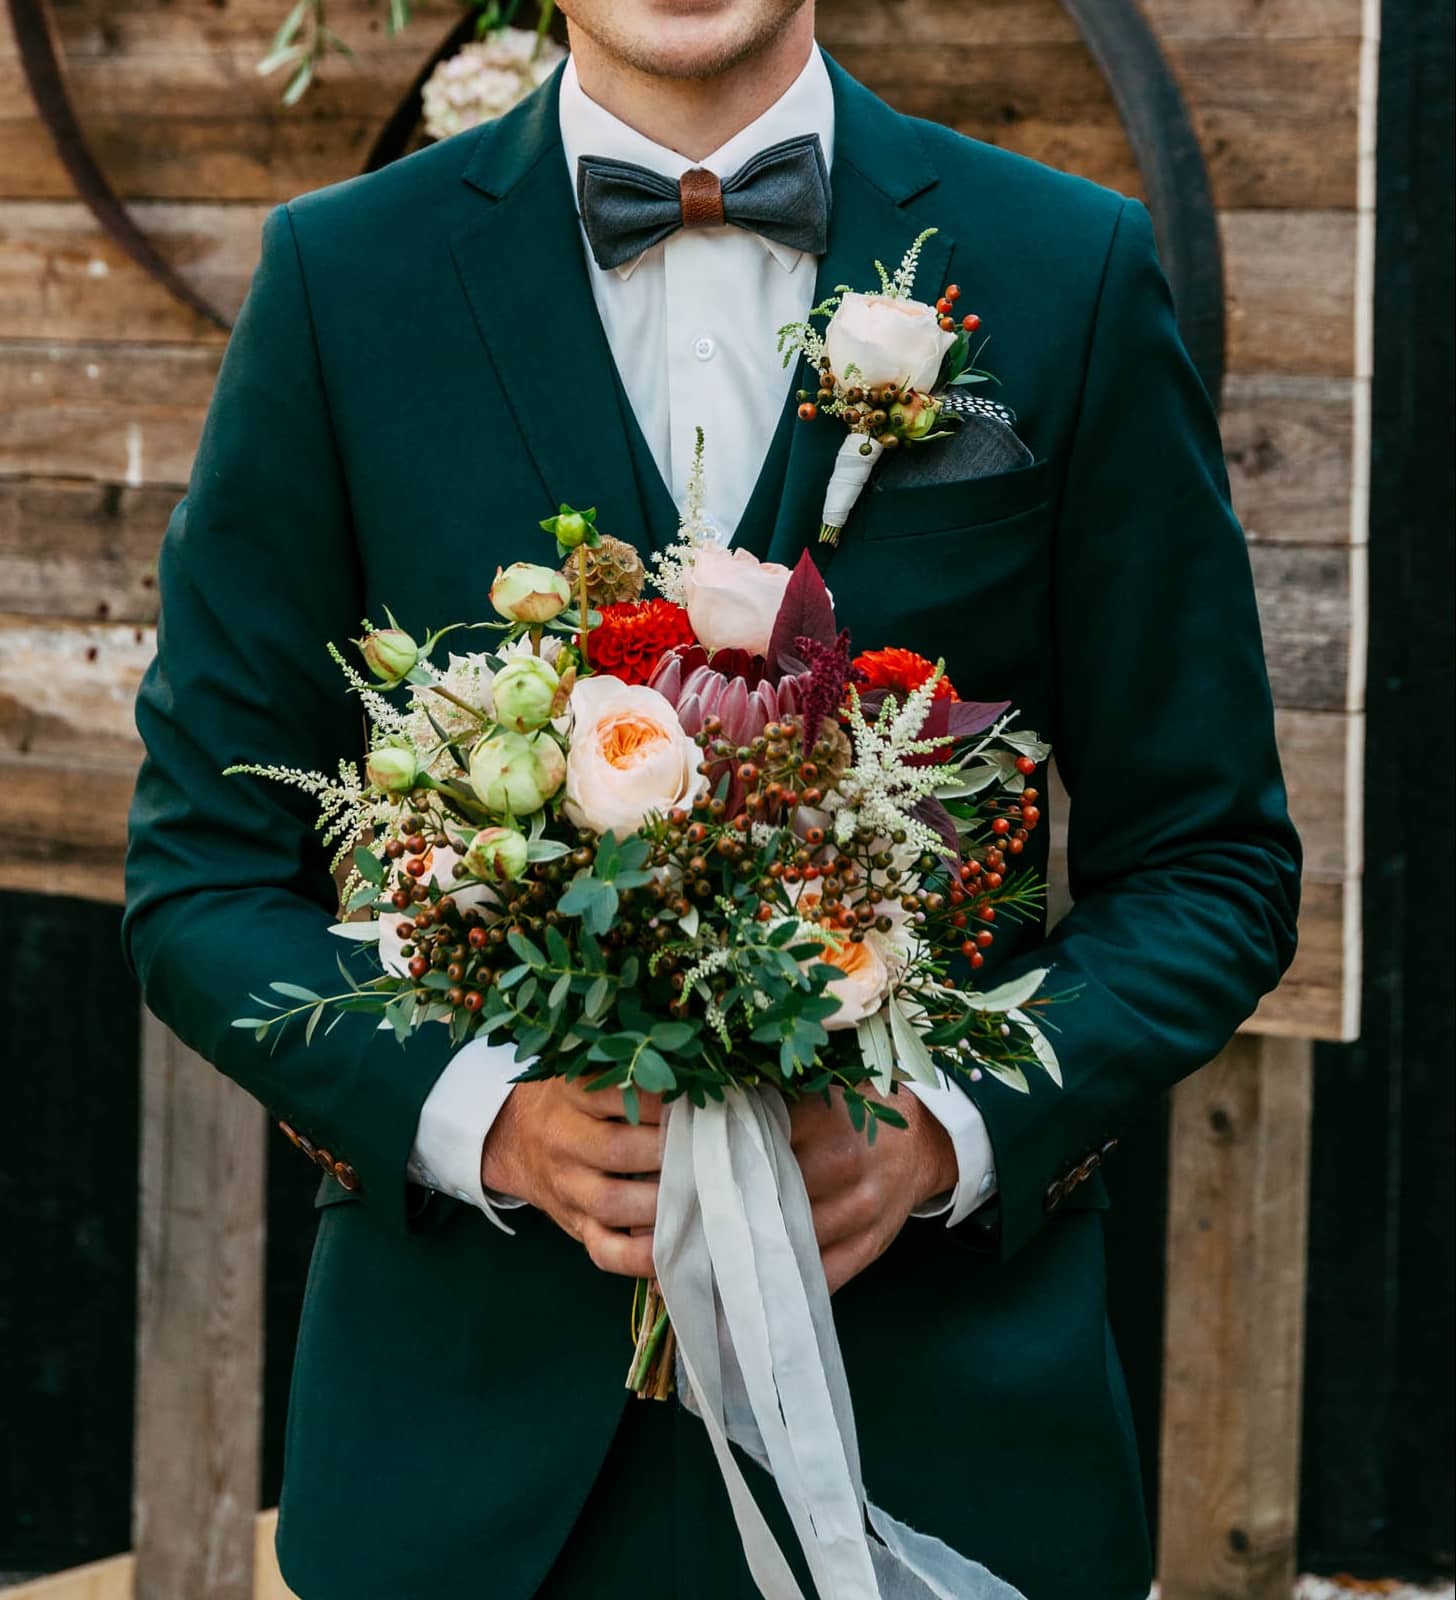 Corsage is placed on groom's blue suit.